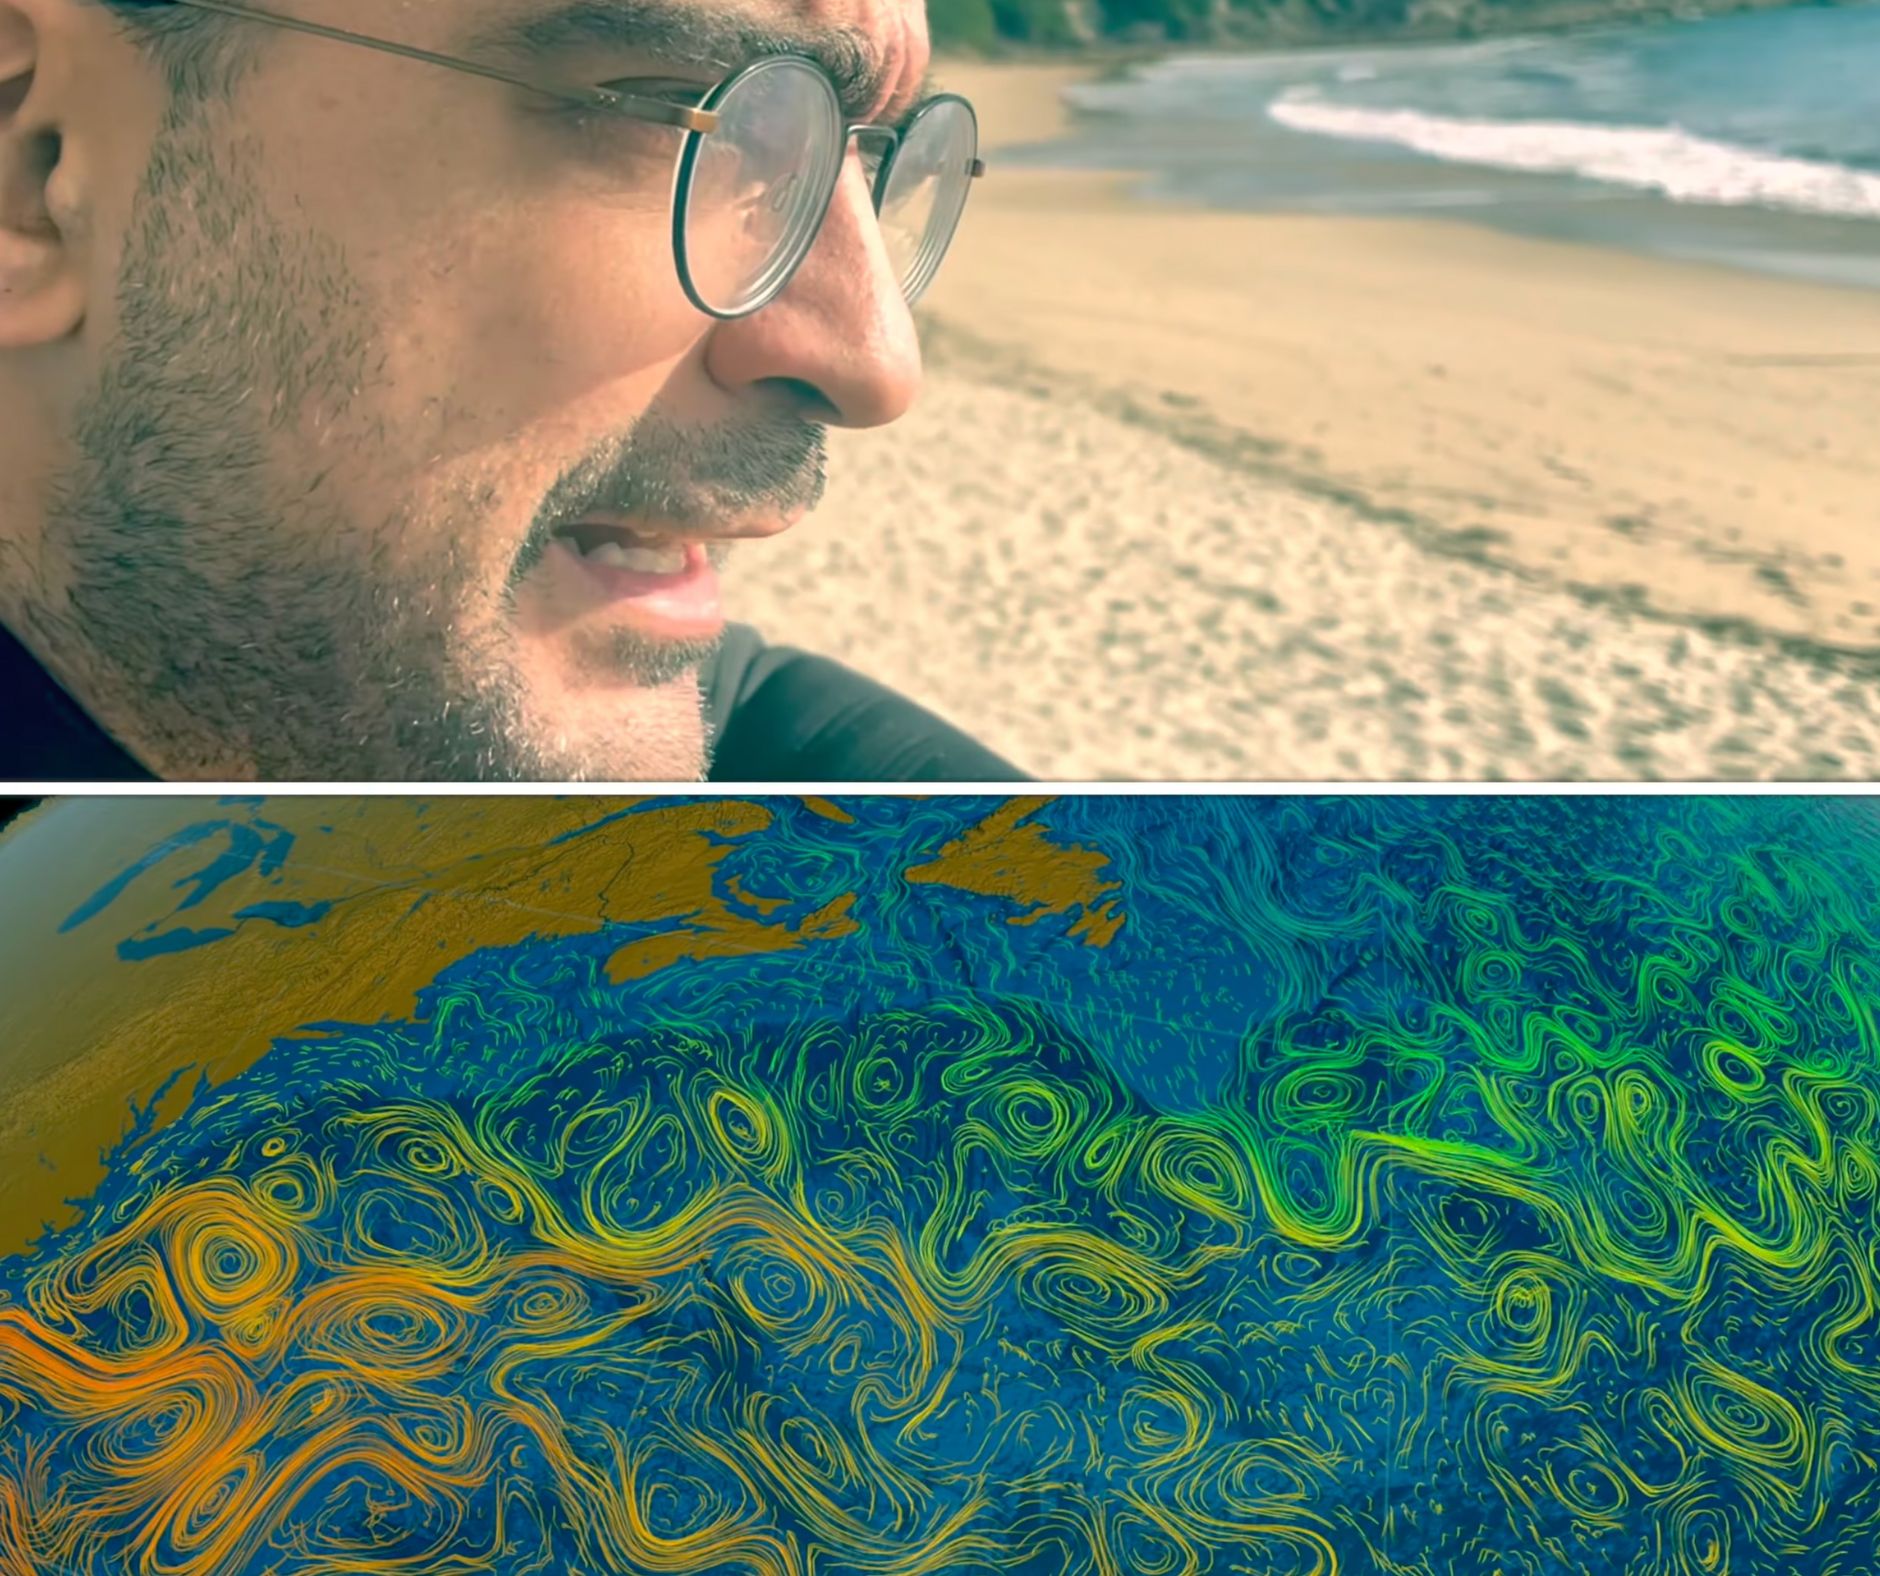 Dr Navid Constantinou explains his work in climate science – surf’s up!